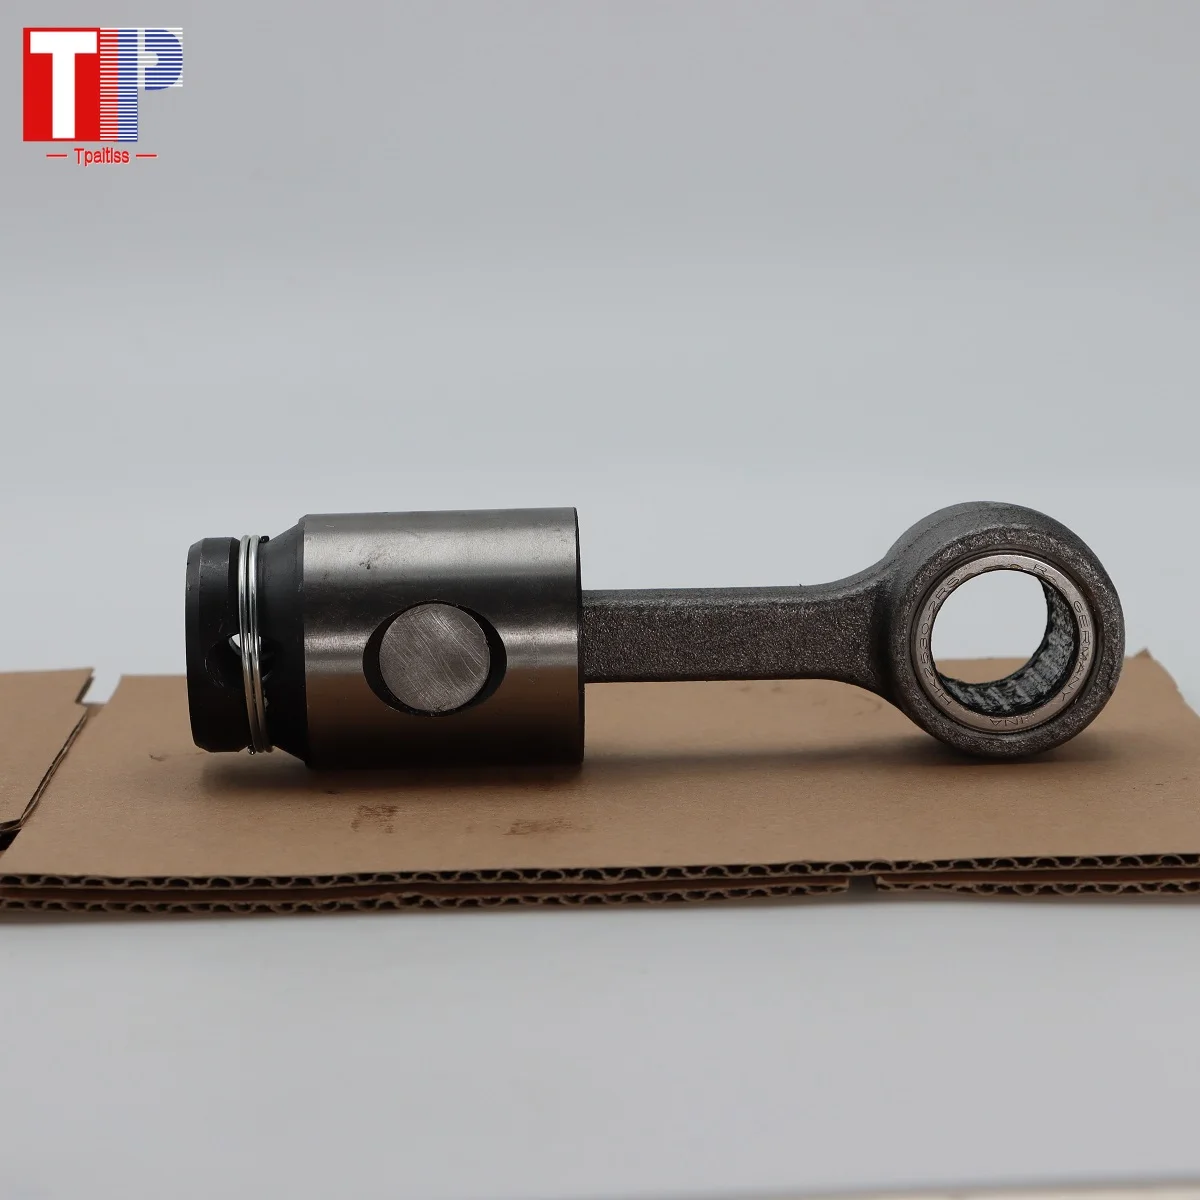 

Tpaitlss Airless Sprayer Replace Piston Connection Rod for Titan Wagner 1095 5900